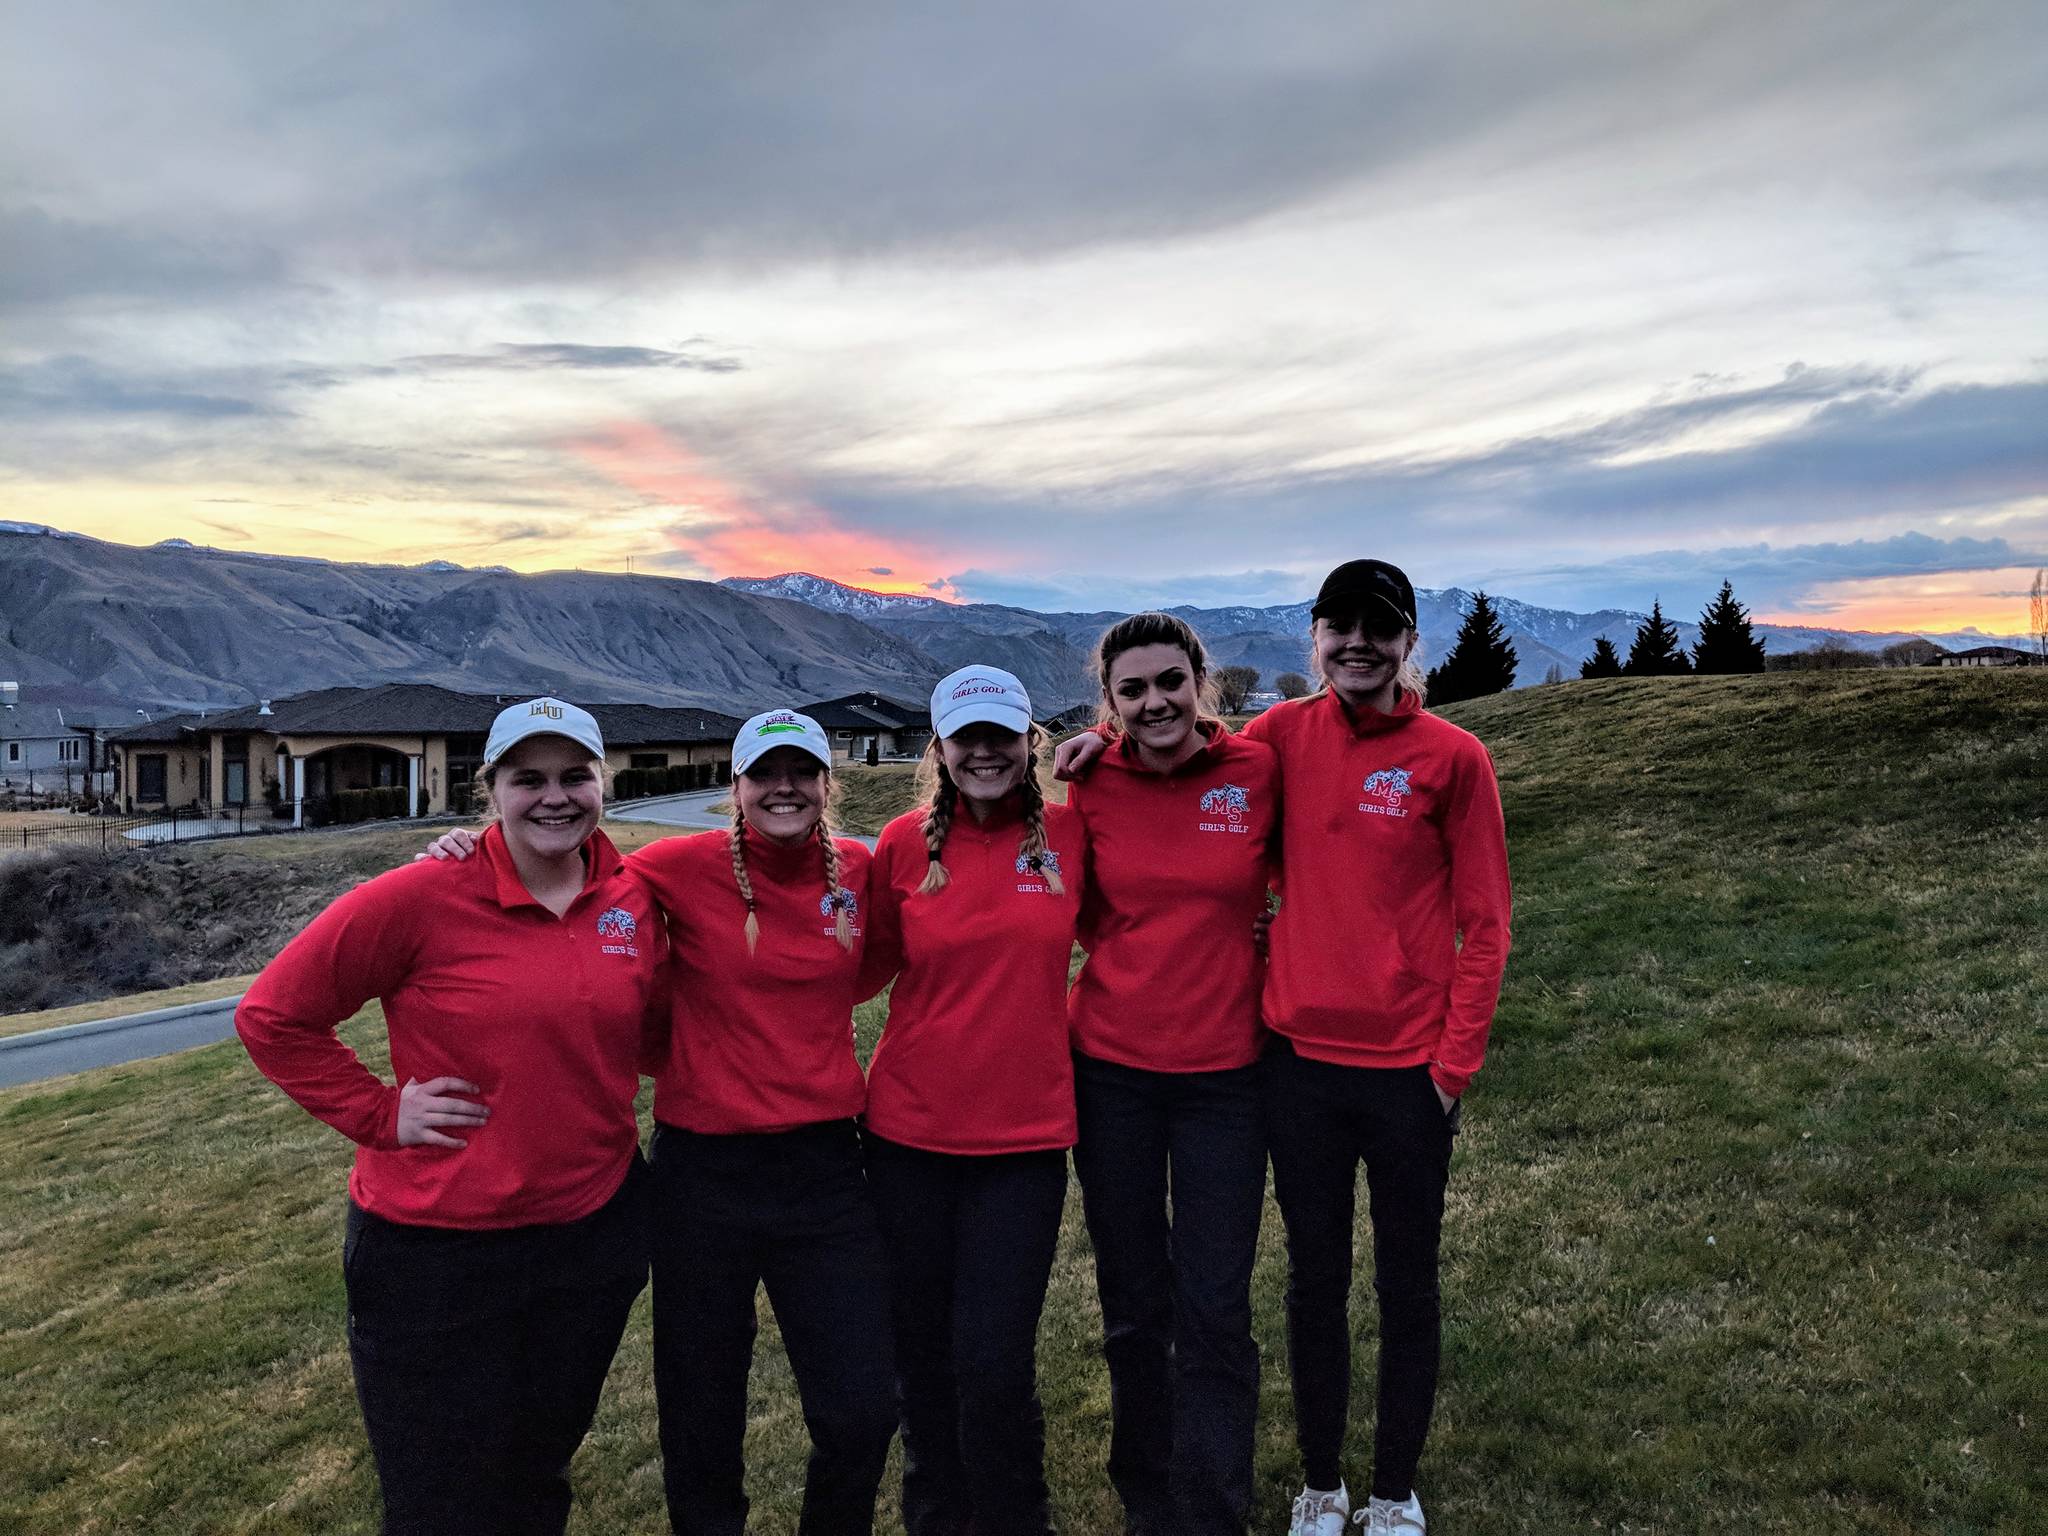 Mount Si golfers, from left to right, Annie Burns, Kat Hodgson, Emma Fougere, Allie Murphy and Tori Berger at Wenatchee Golf & Country Club. Photo courtesy of Stephen Botulinski